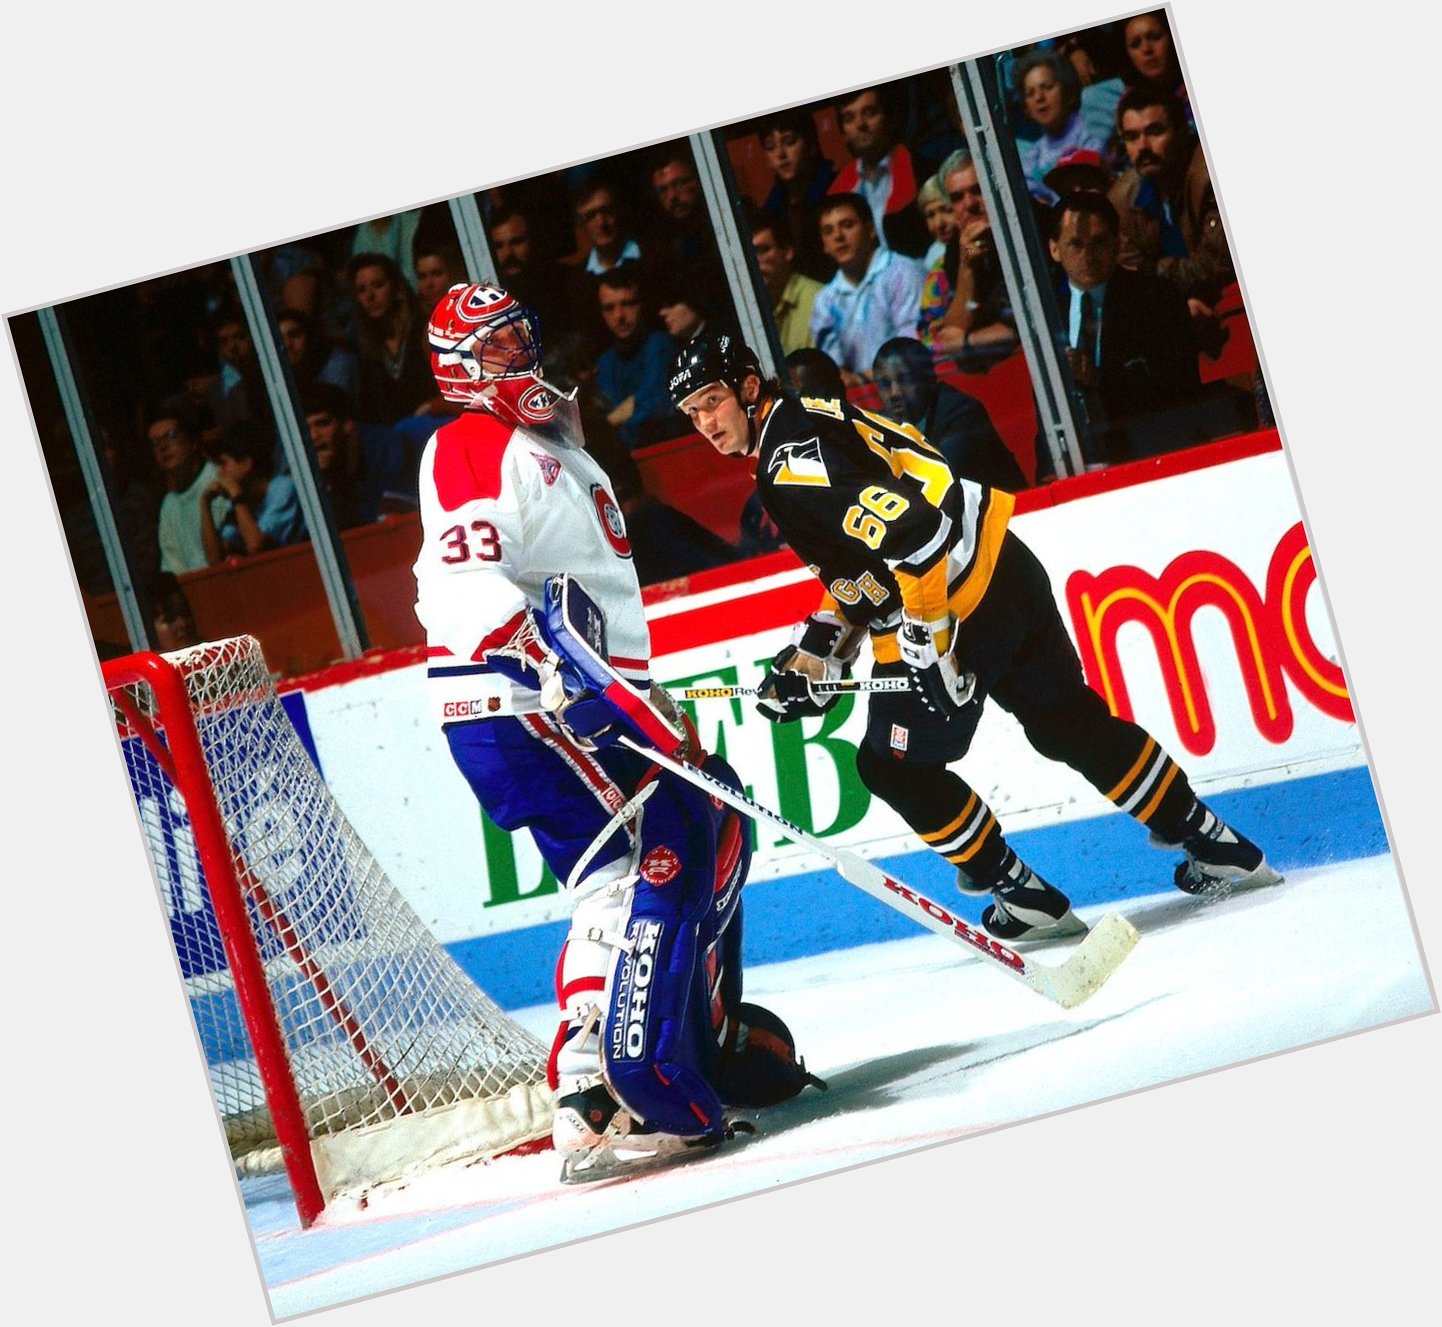 Happy birthday to 2 of the best of all time, Patrick Roy and Mario Lemieux! 